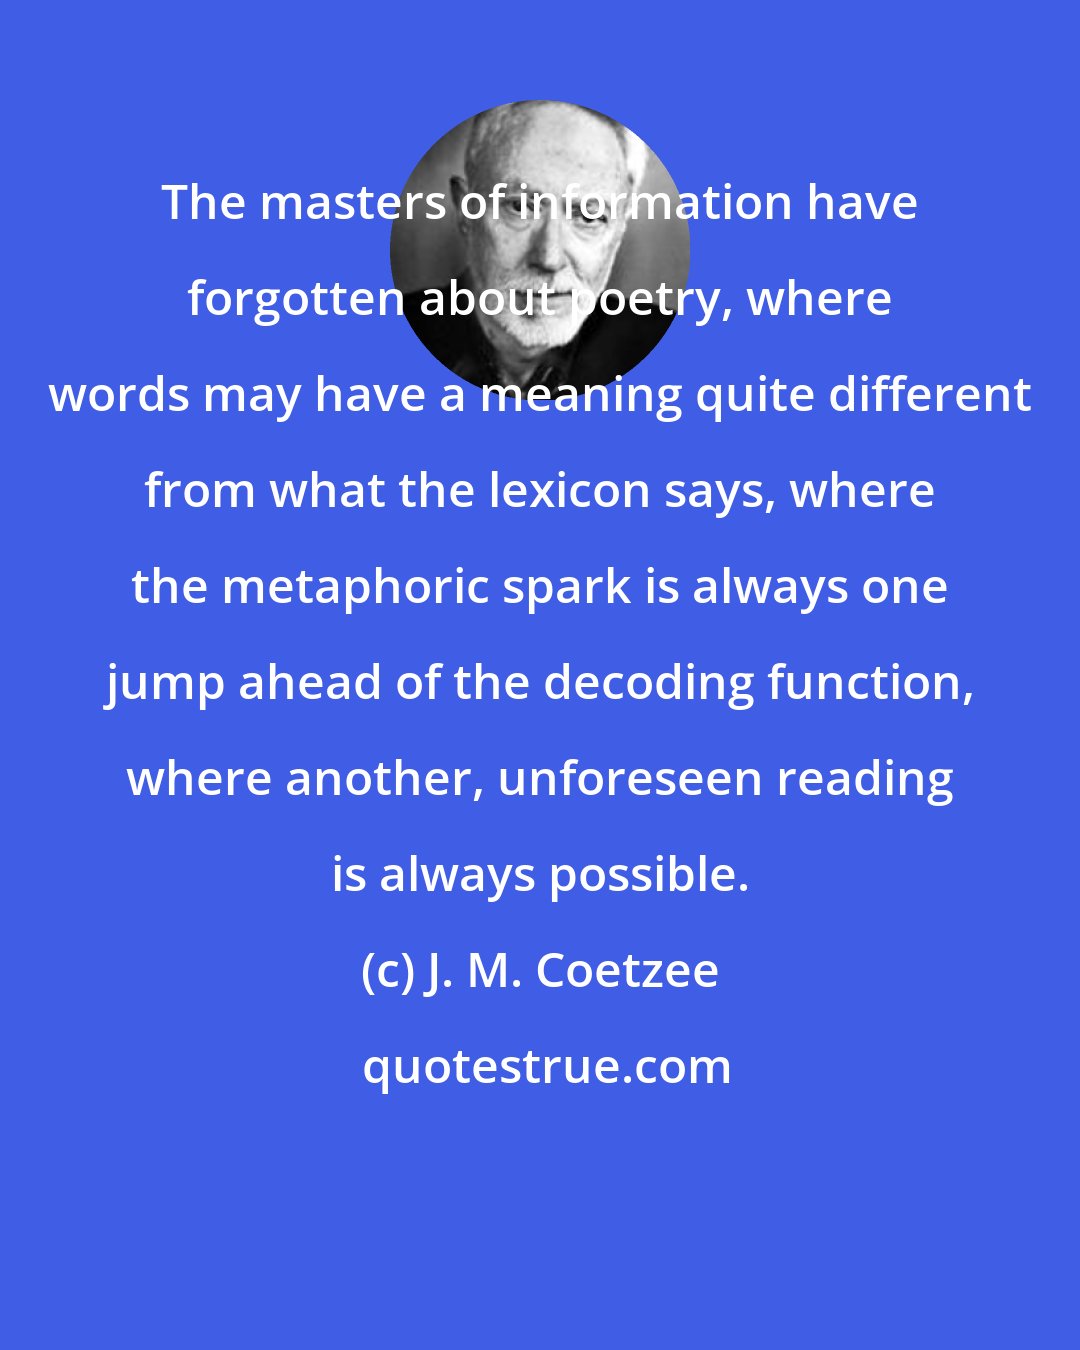 J. M. Coetzee: The masters of information have forgotten about poetry, where words may have a meaning quite different from what the lexicon says, where the metaphoric spark is always one jump ahead of the decoding function, where another, unforeseen reading is always possible.